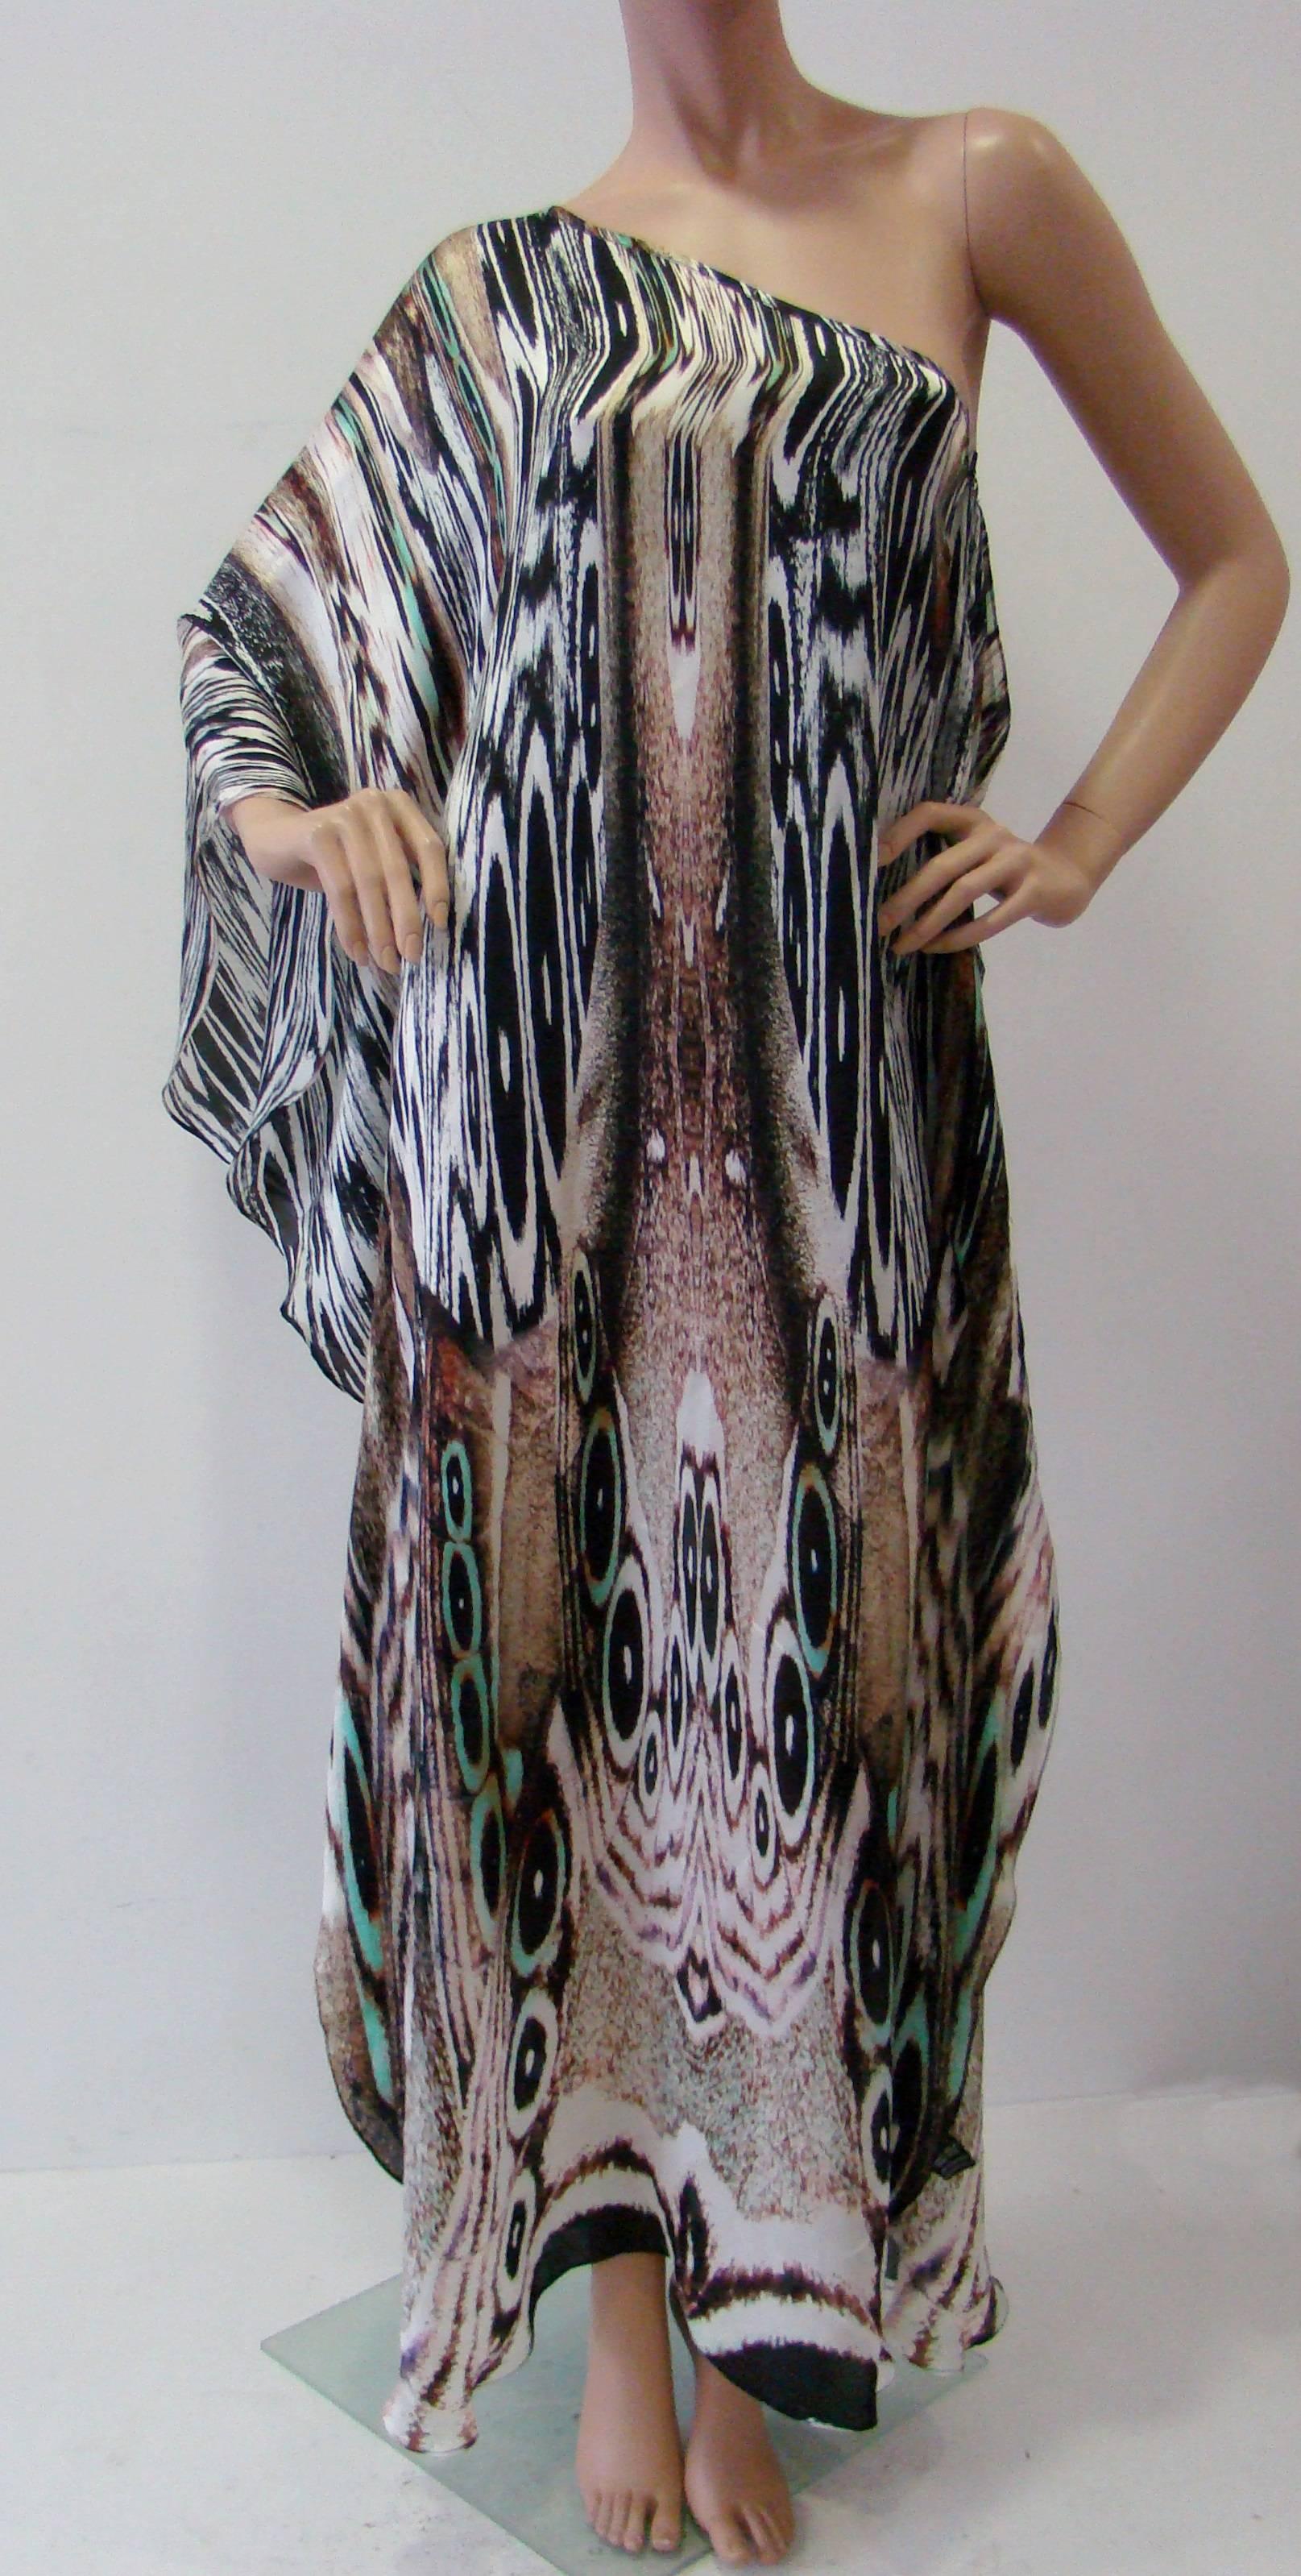 Museum quality caftan dress from Laleh Fayaz. It has a contemporary printing and it is hand made in Greece from the finest Italian textiles. An ecxlusive caftan dress with one shoulder and a bat wing, with belt. it is so smooth and soft. You can